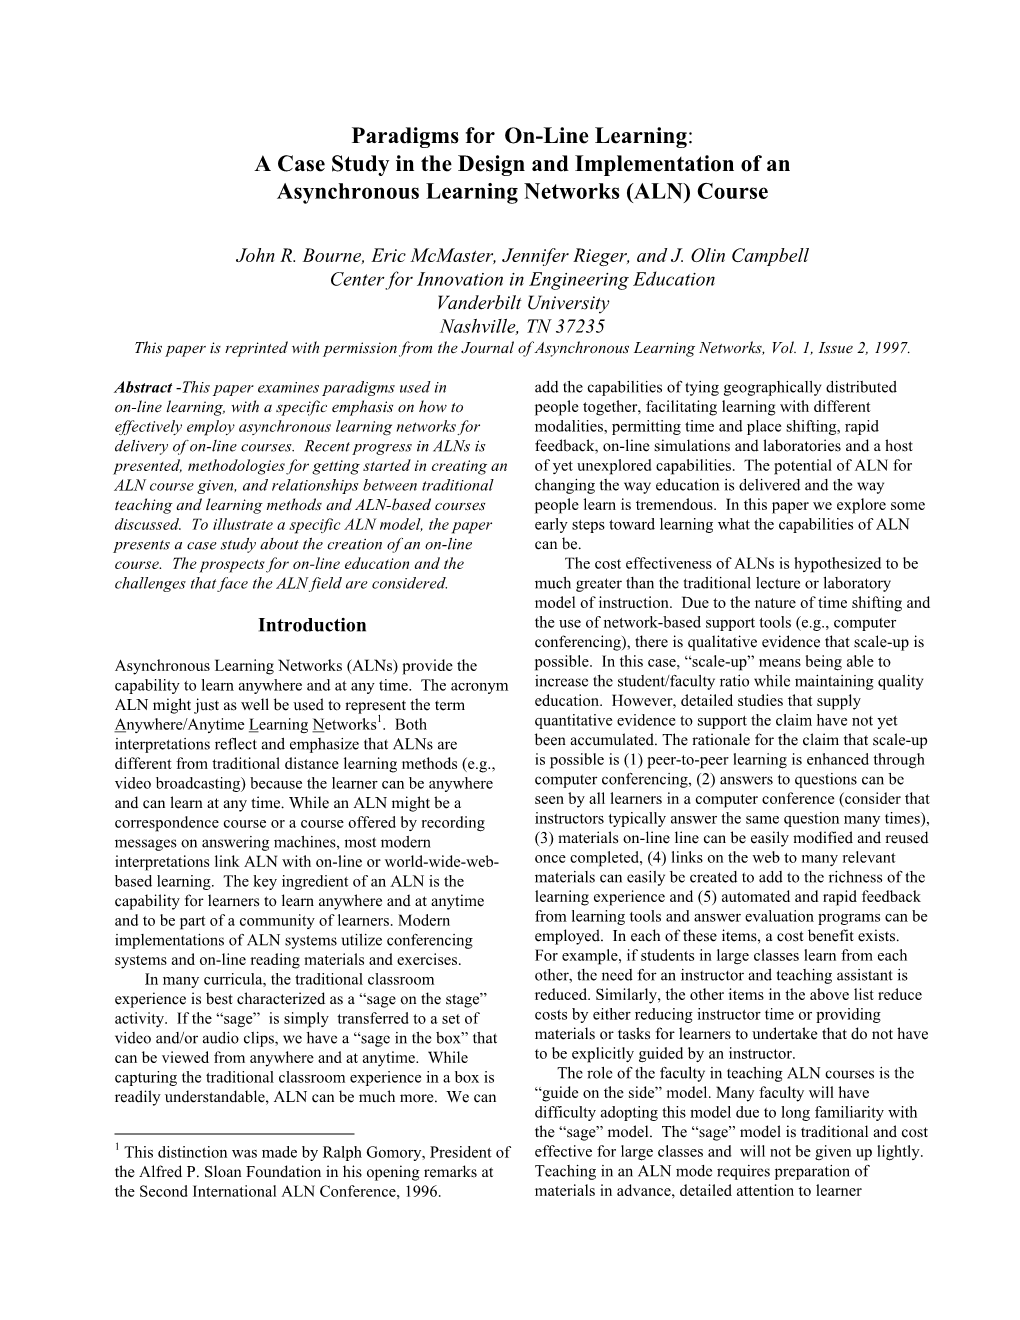 Paradigms for On-Line Learning : a Case Study in the Design And